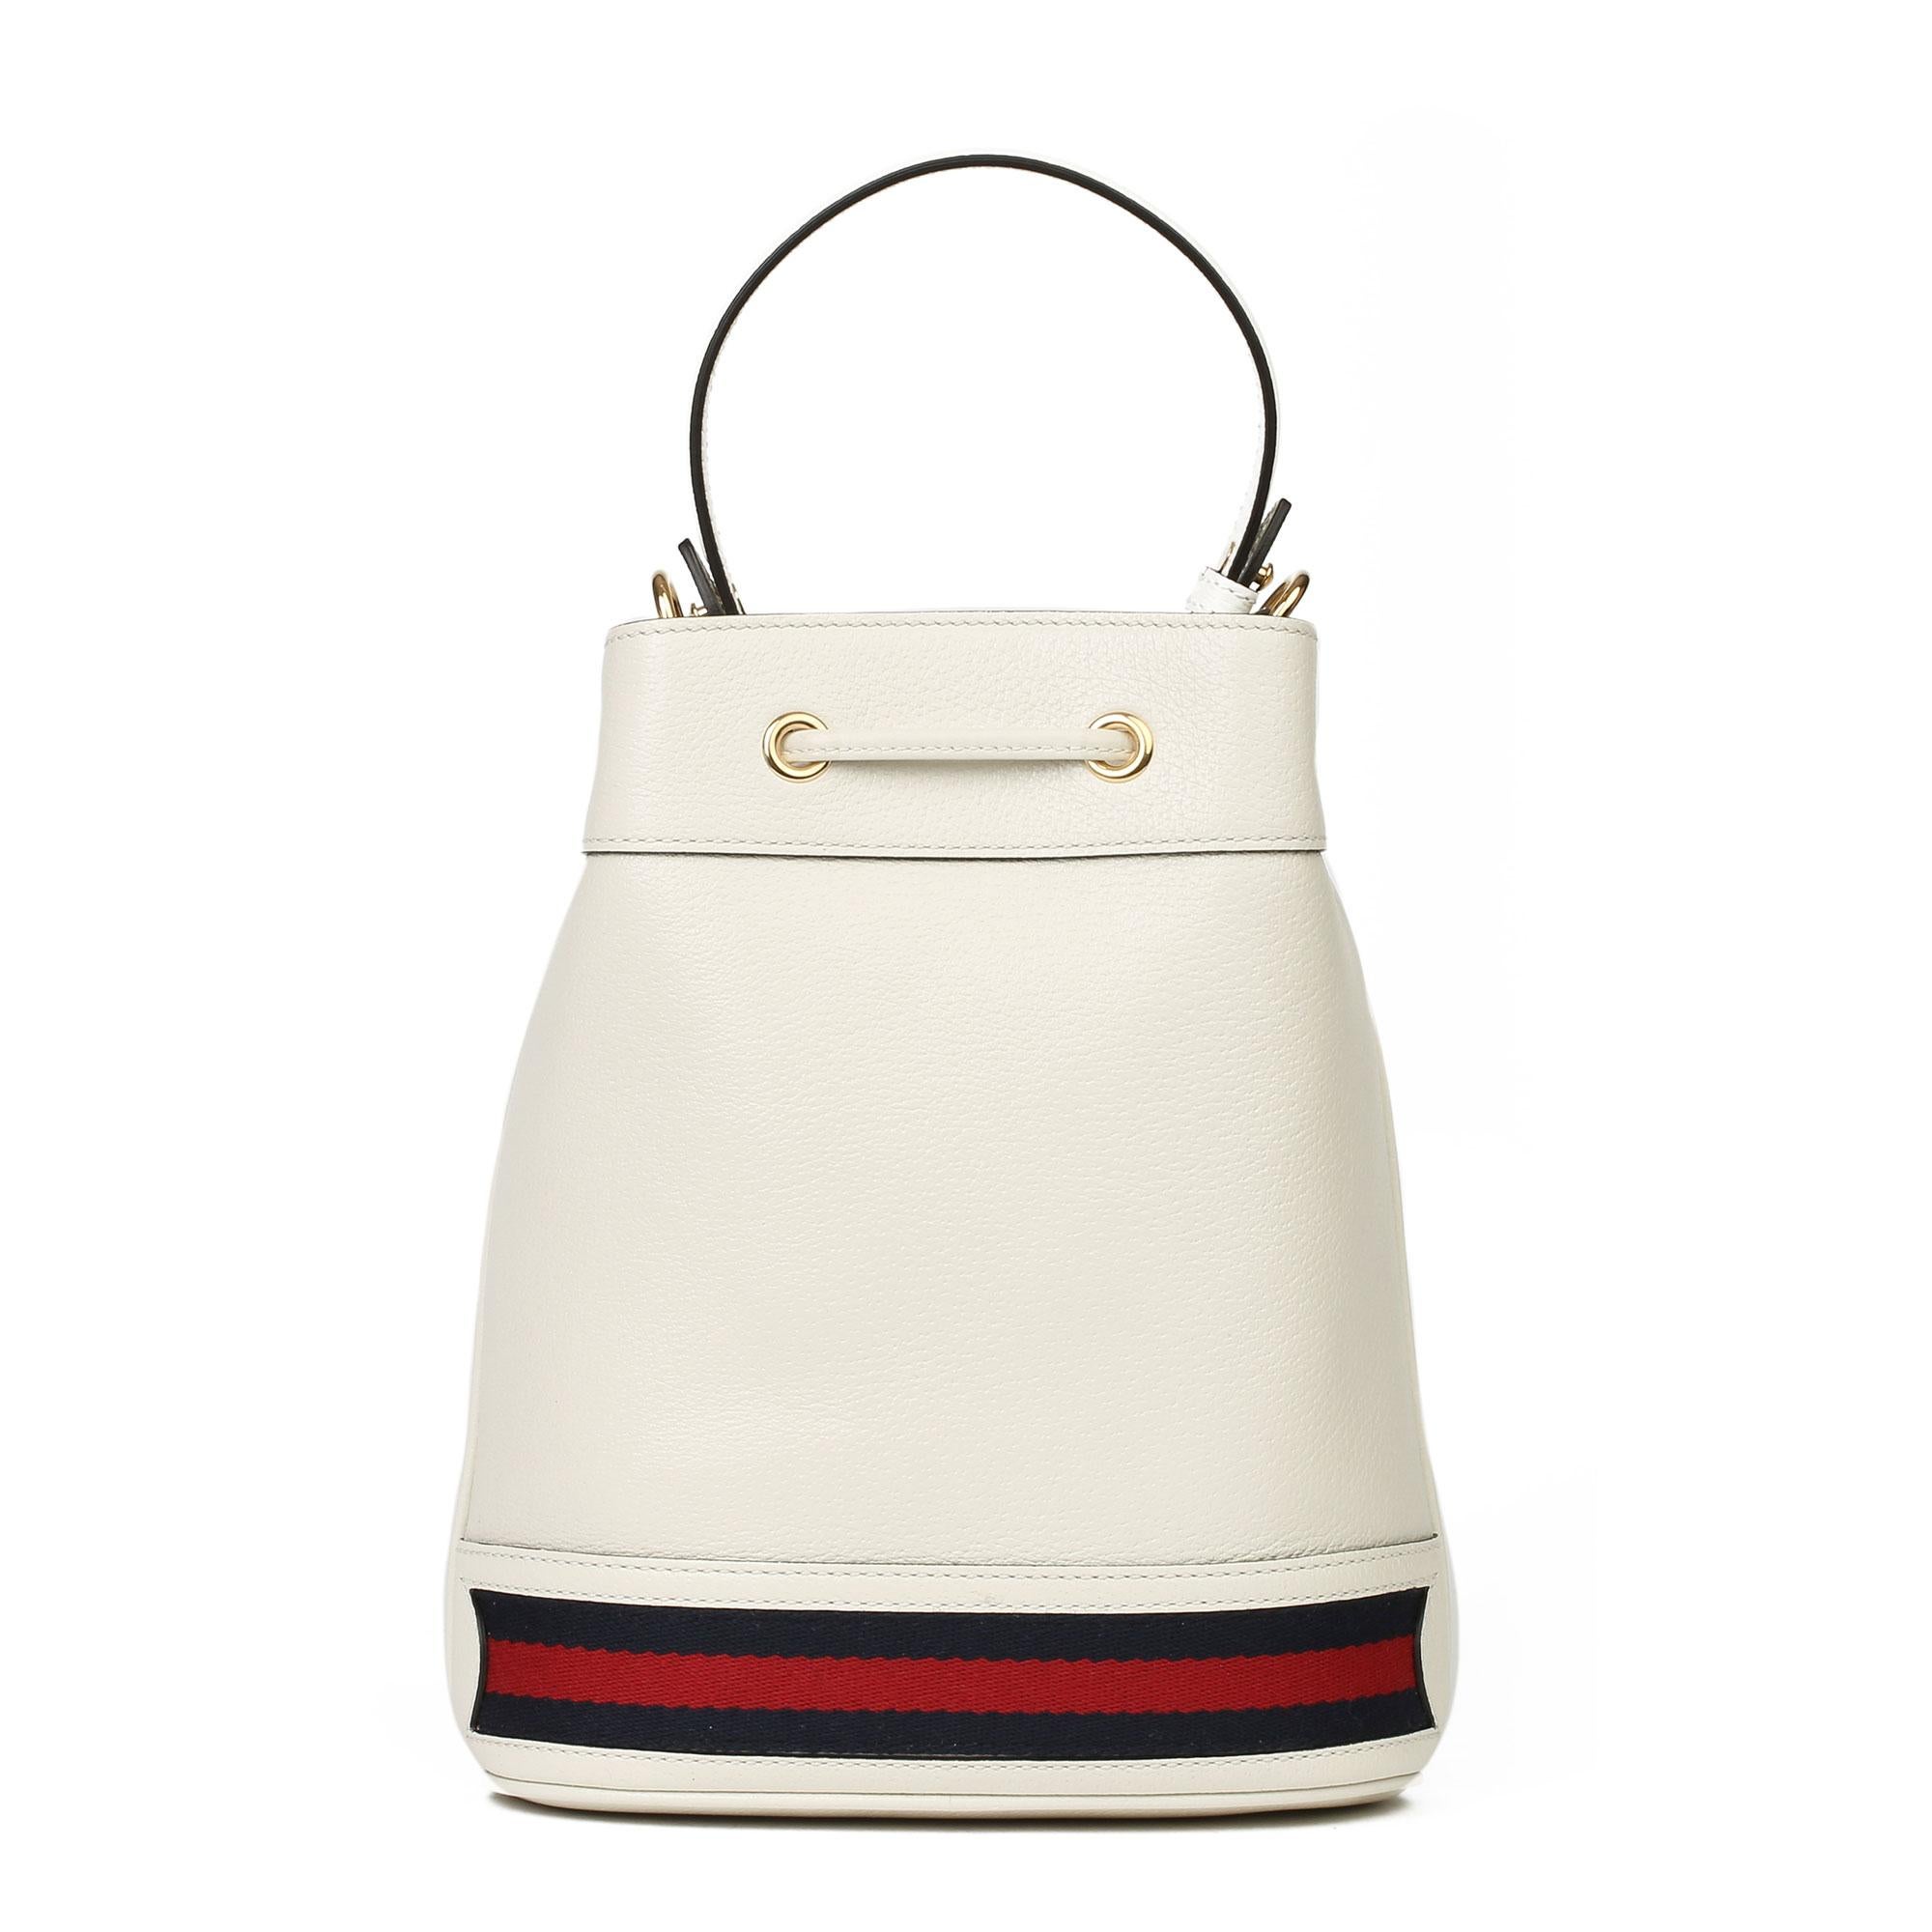 Women's or Men's 2021 Gucci White Pigskin Leather Web Orphidia Bucket Bag